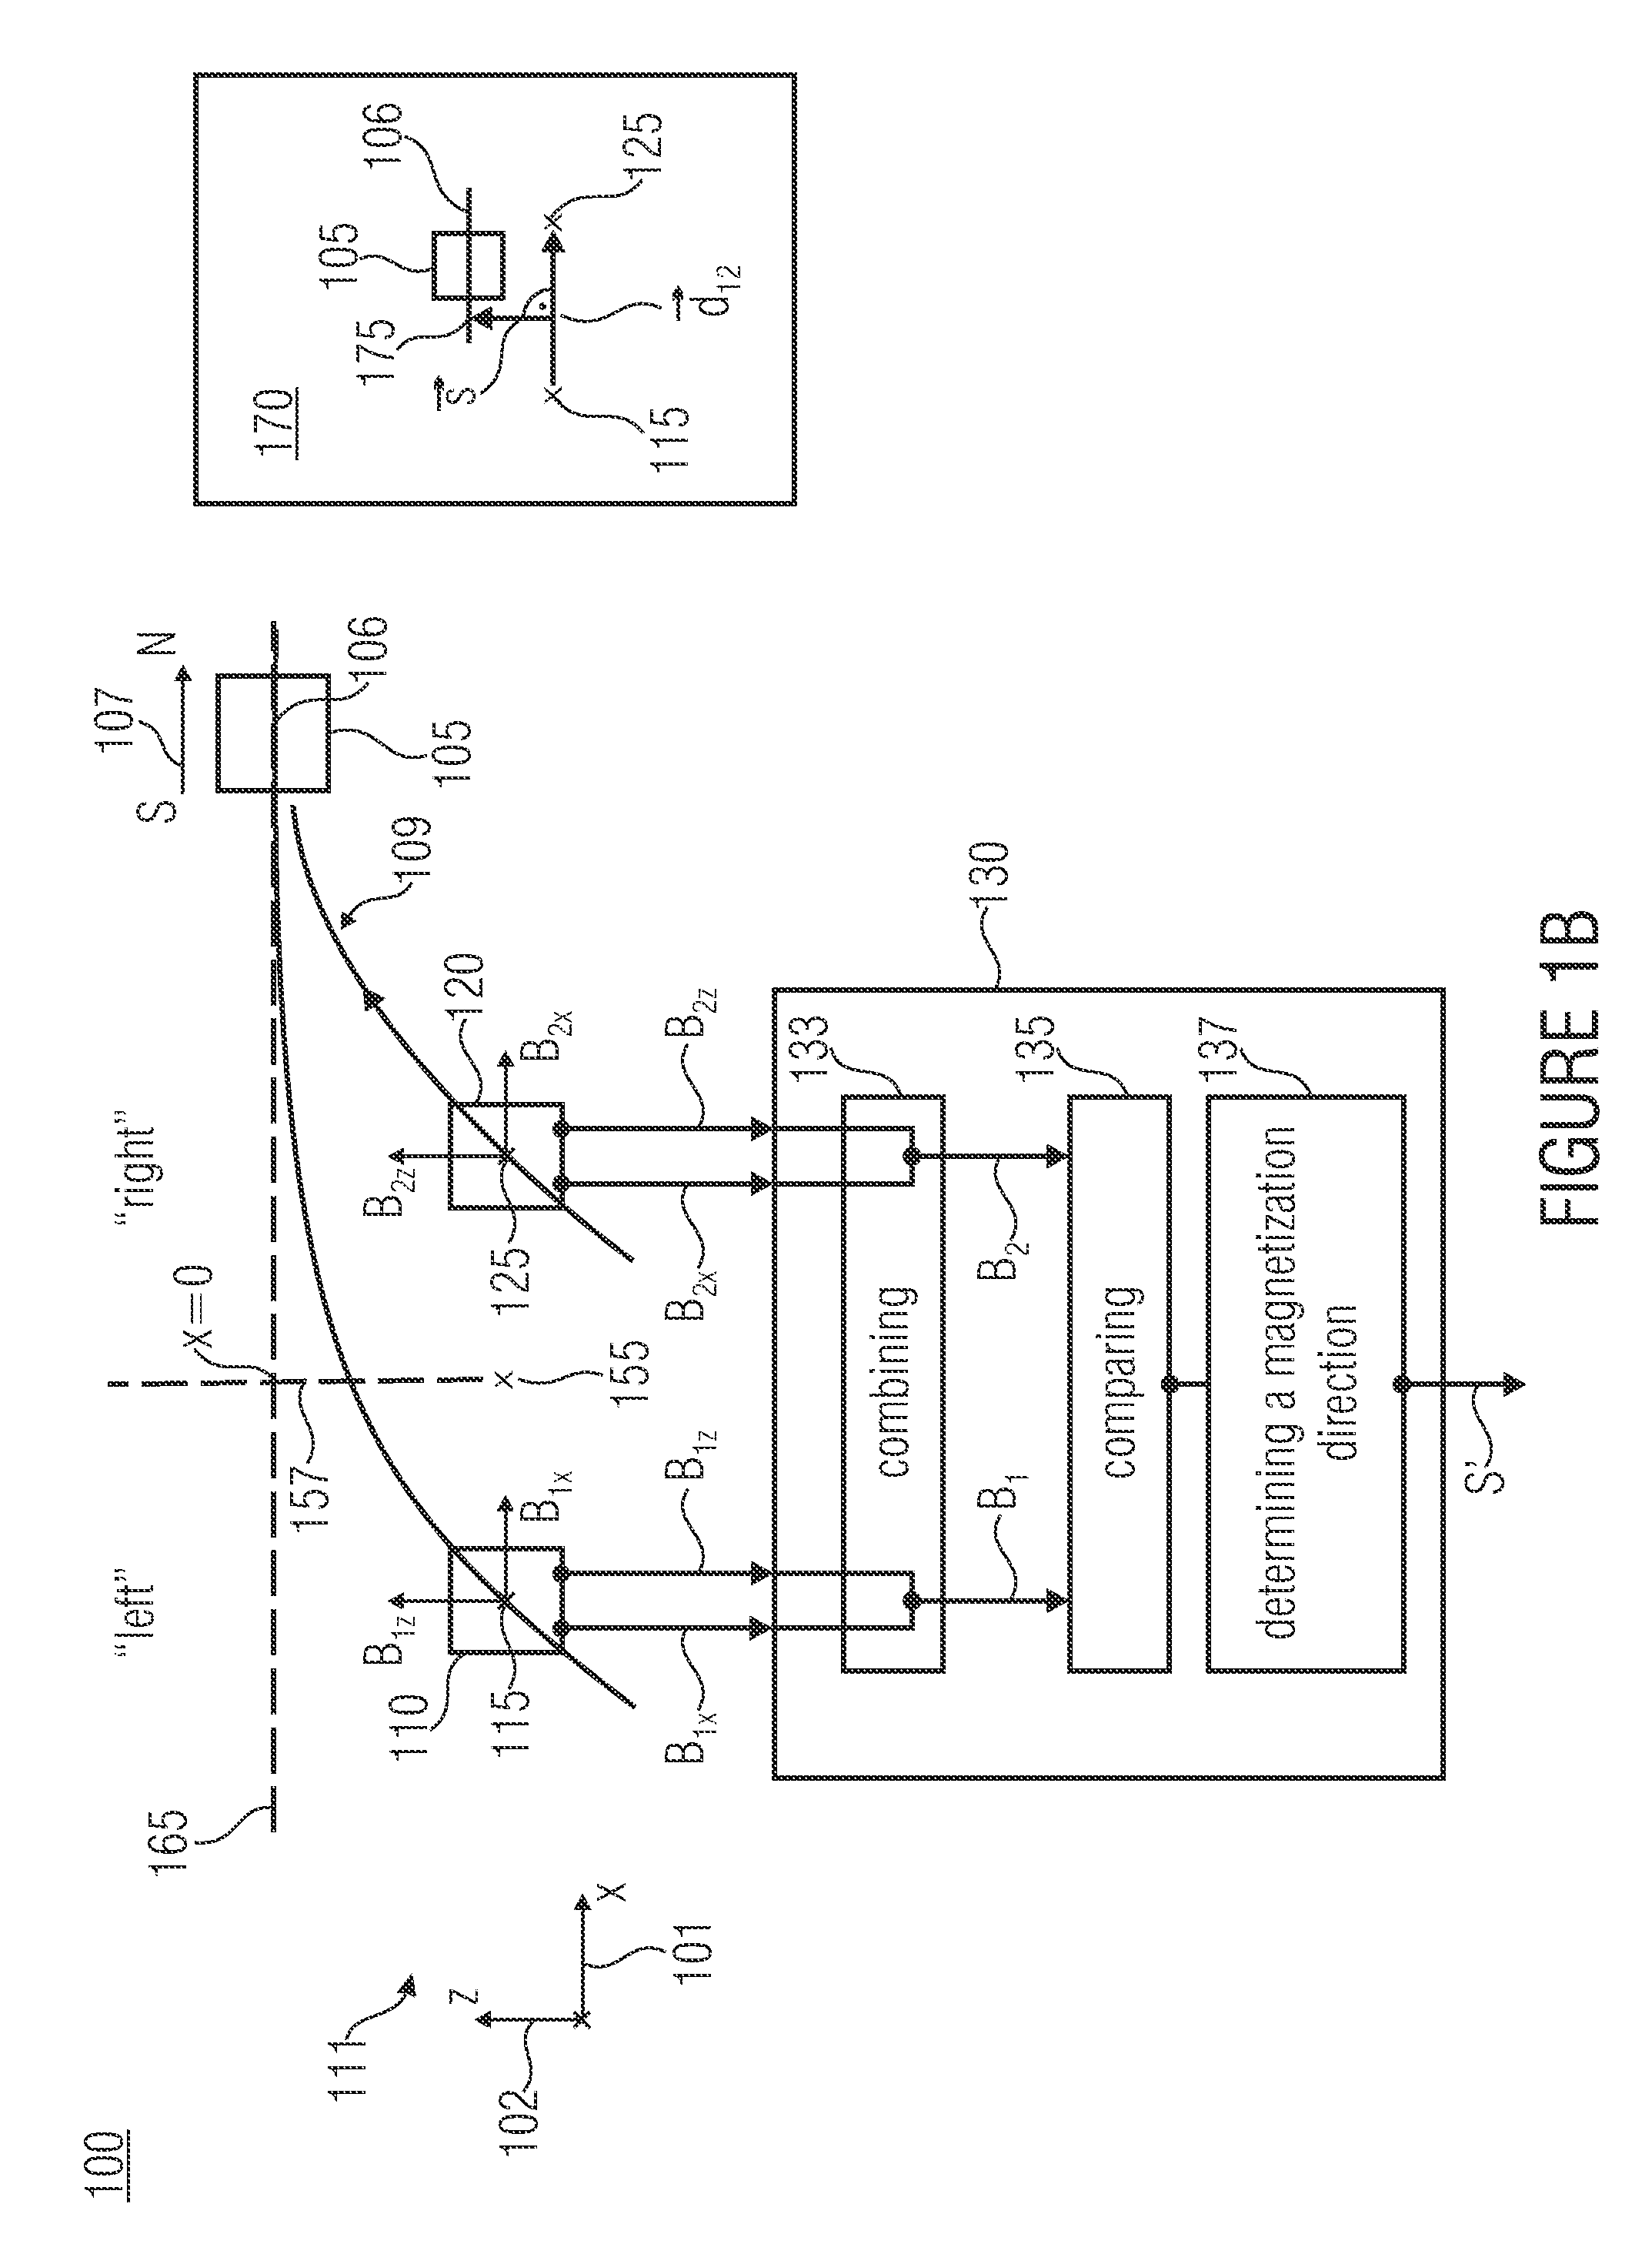 Sensor assembly and method for determining a magnetization direction of an indicator magnet